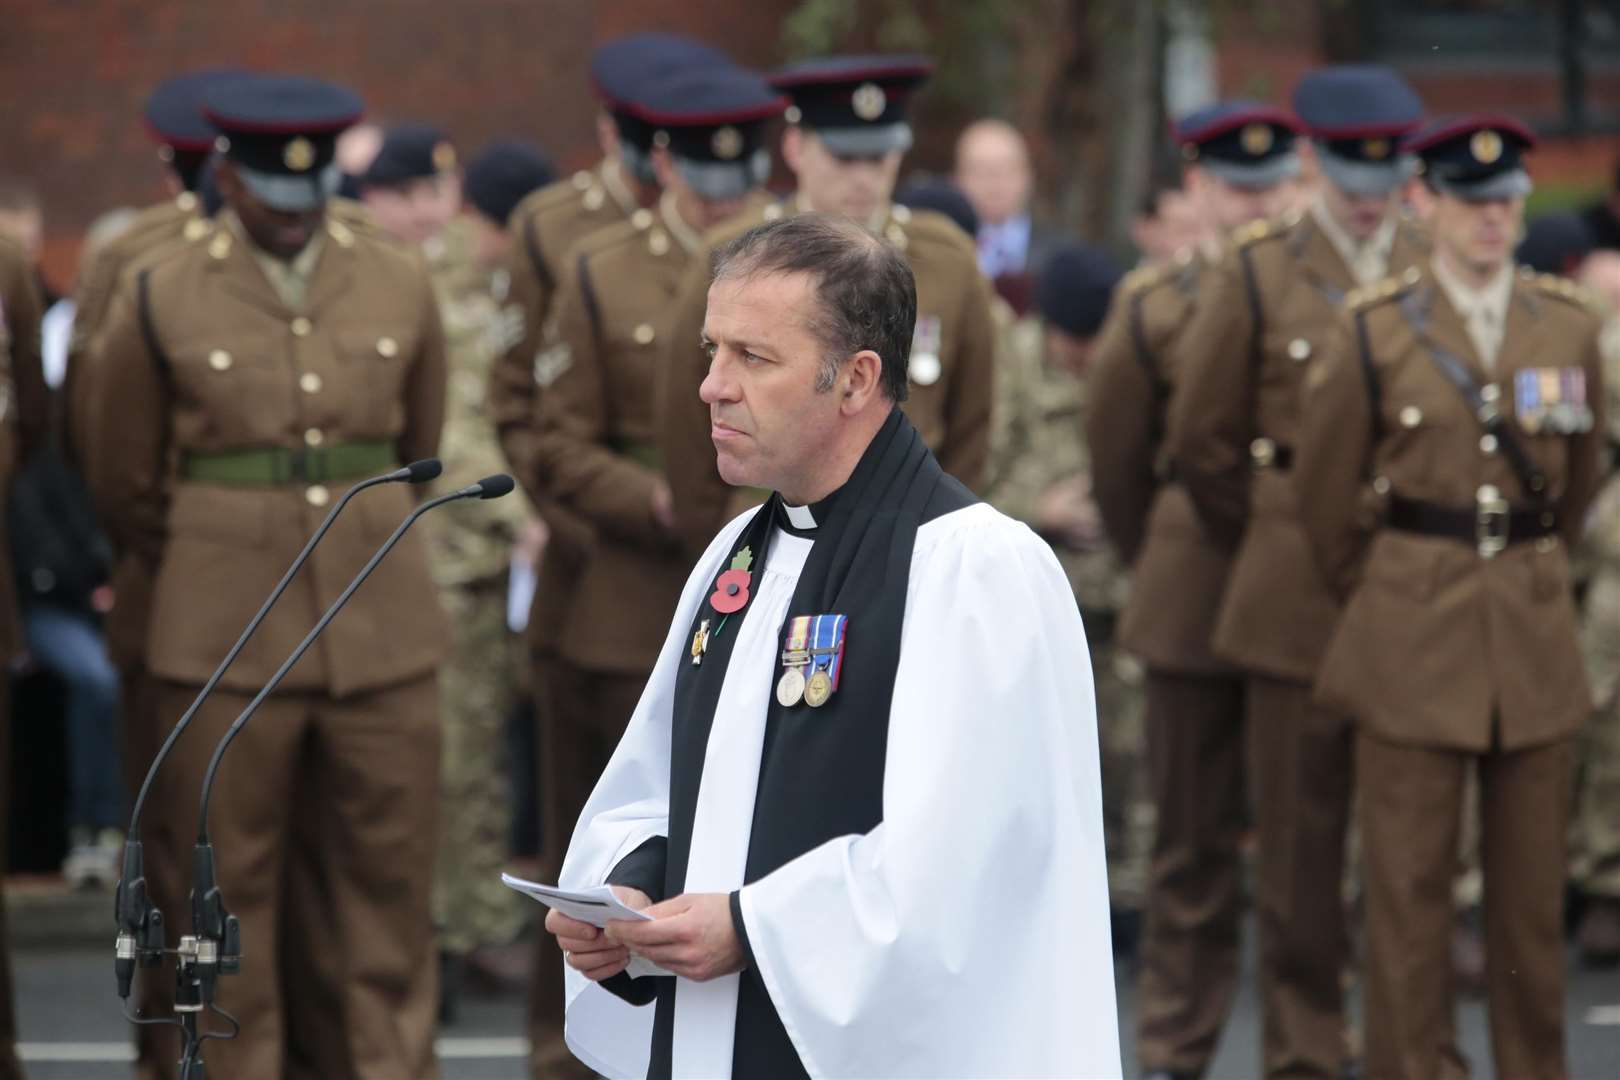 Rev'd Ian Parrish has called on the community to come together and help those affected